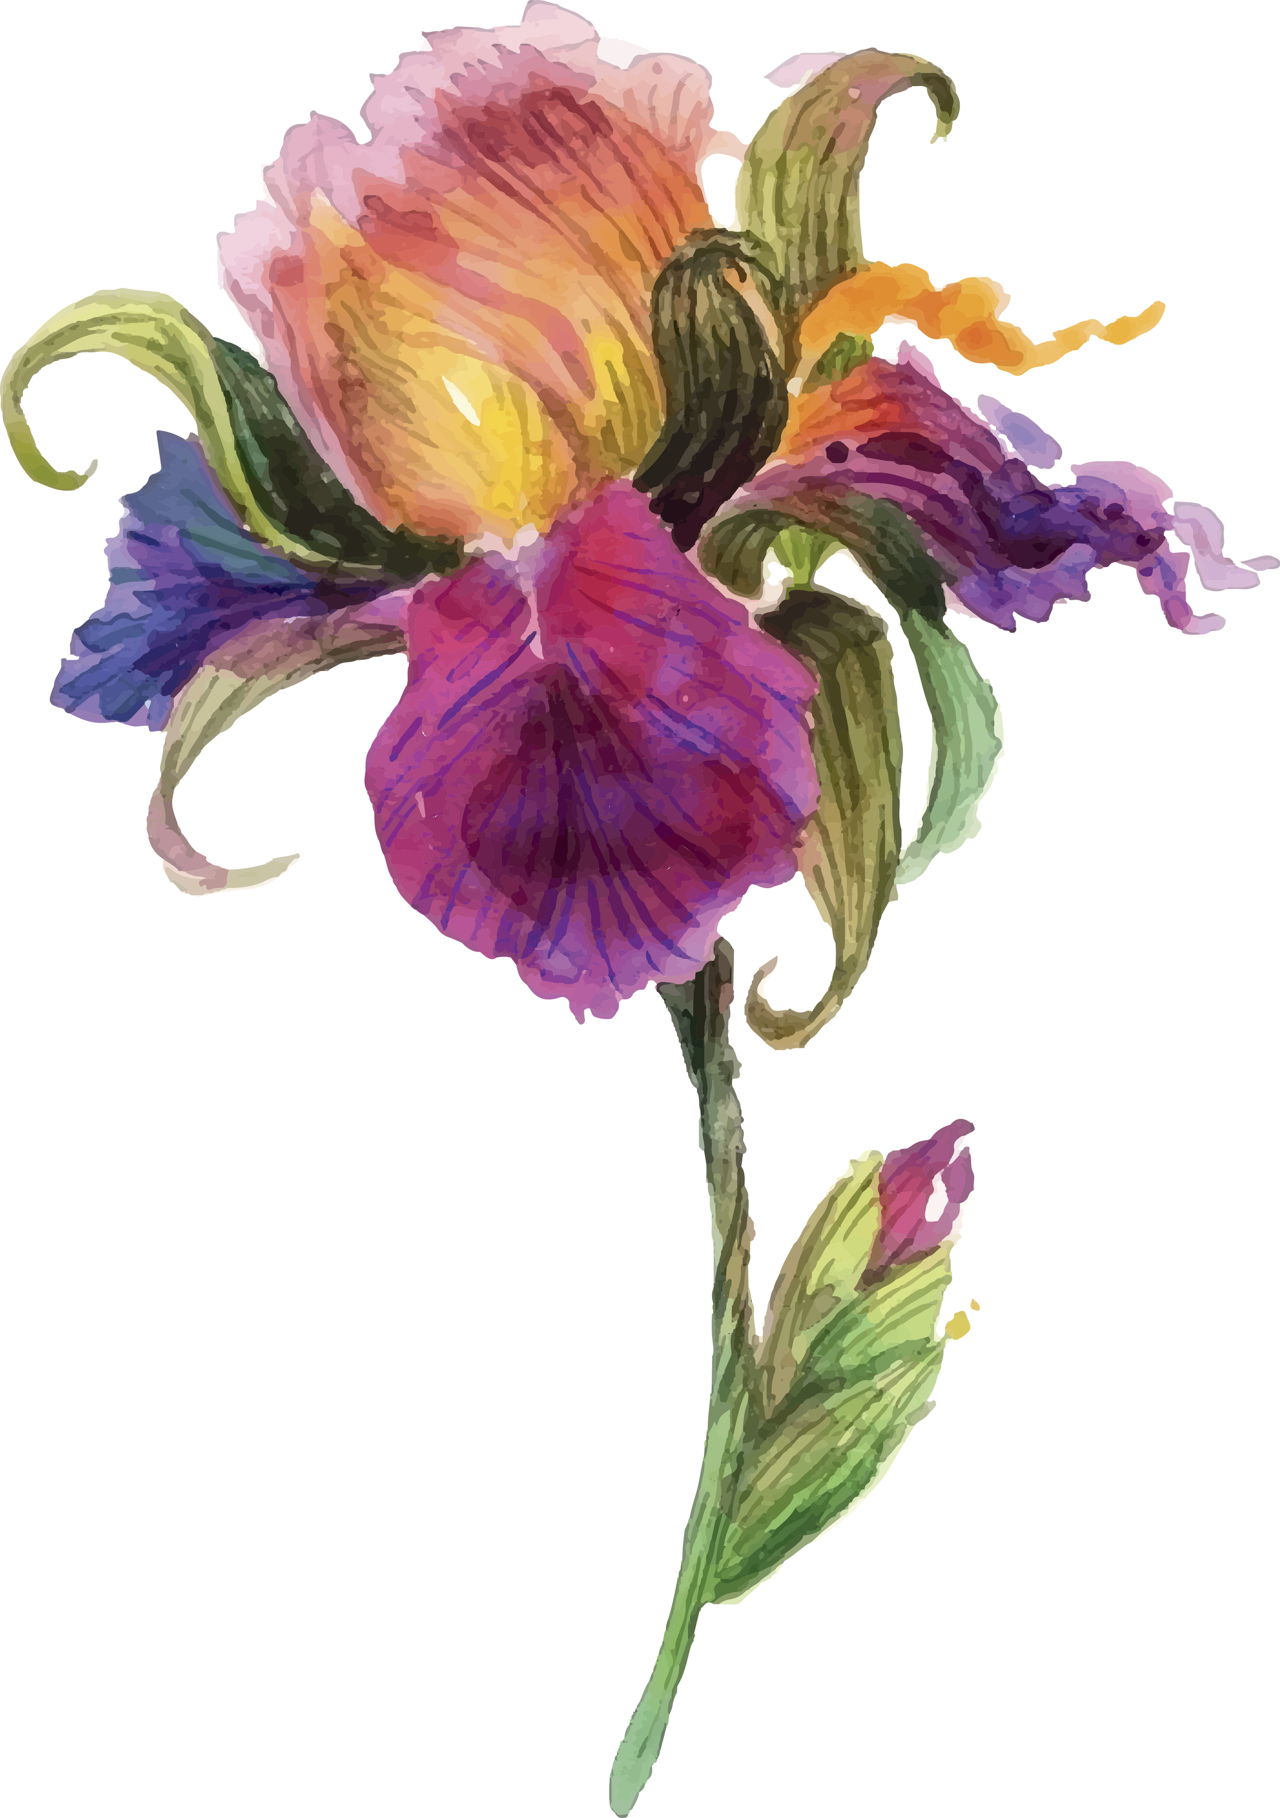 Learn How To Draw Flowers With These Step By Step Instructions